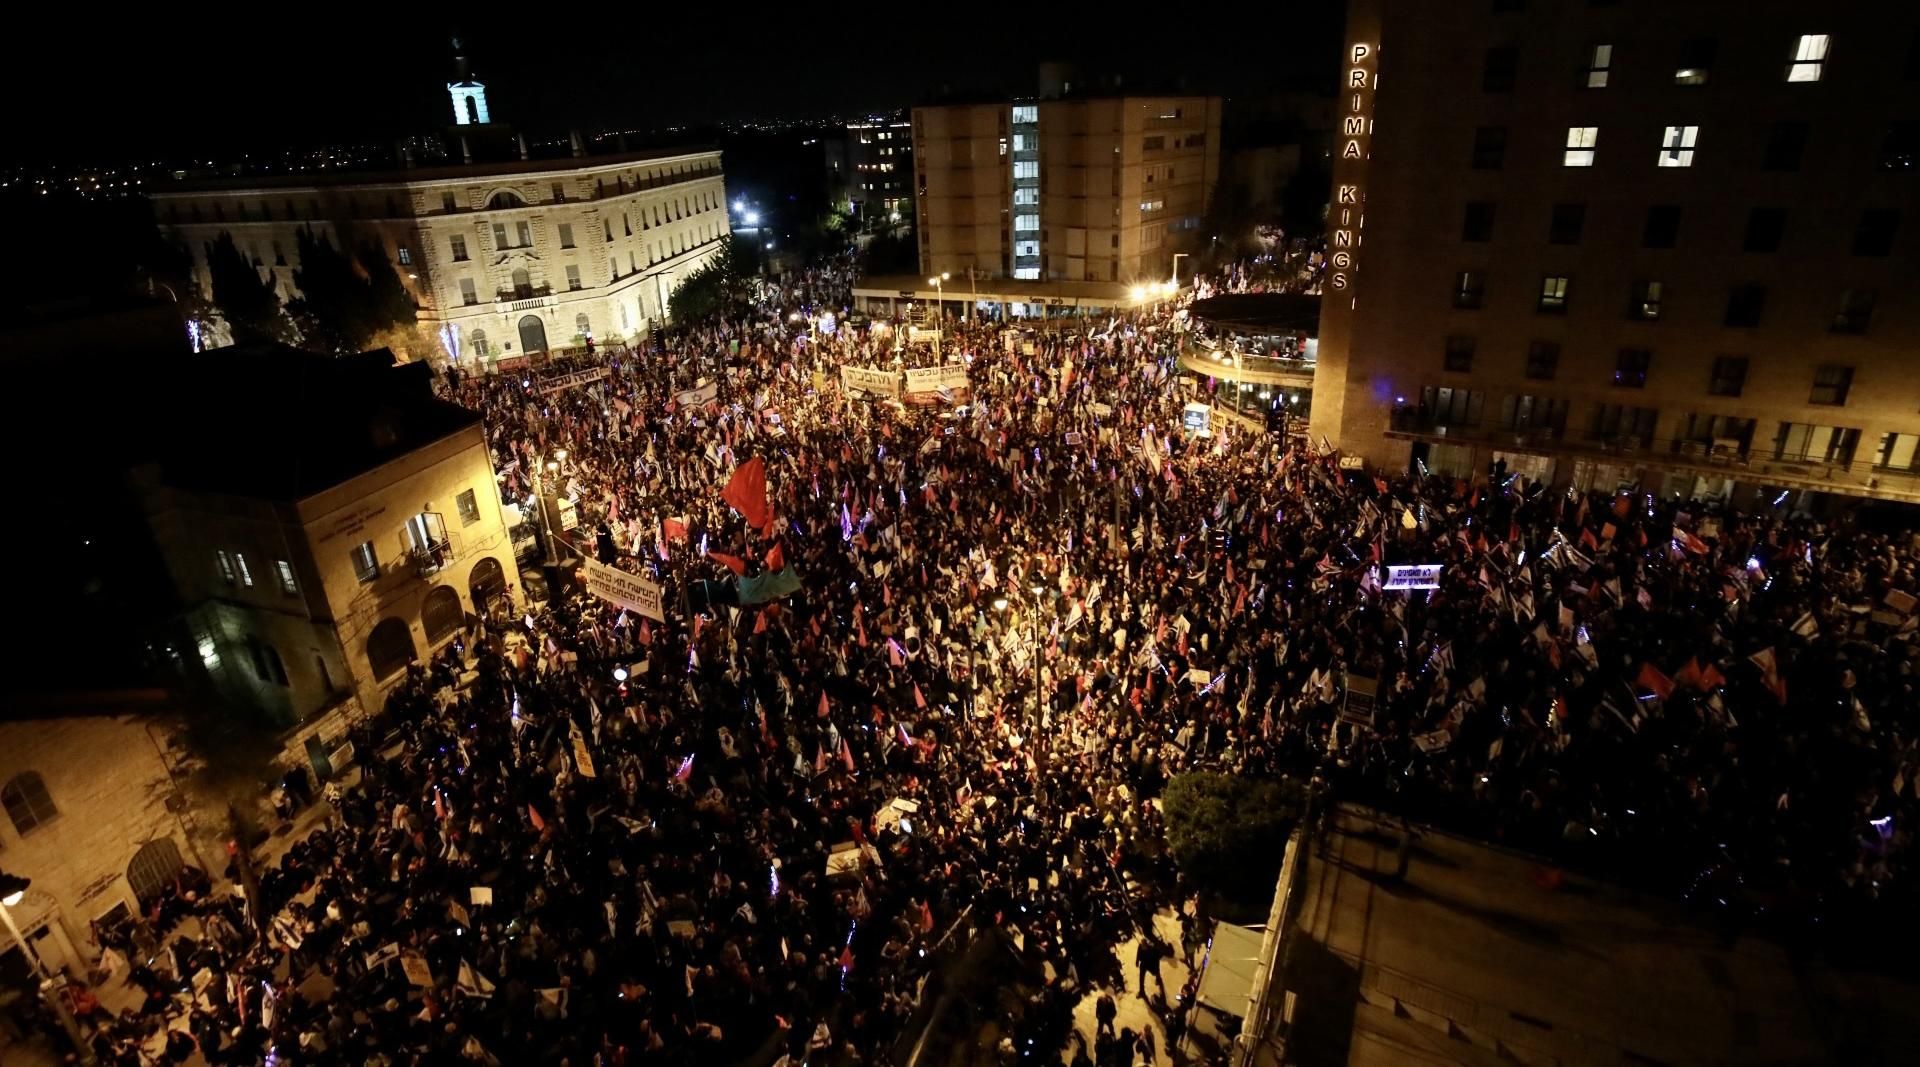 Tens of thousands of people gather in front of the Israeli Parliament during a pre-election demonstration to protest against Israeli Prime Minister Benjamin Netanyahu, in West Jerusalem on March 20, 2021. Demonstrators demanded Netanyahu resign over his indictments on charges of bribery, fraud and breach of public trust. 